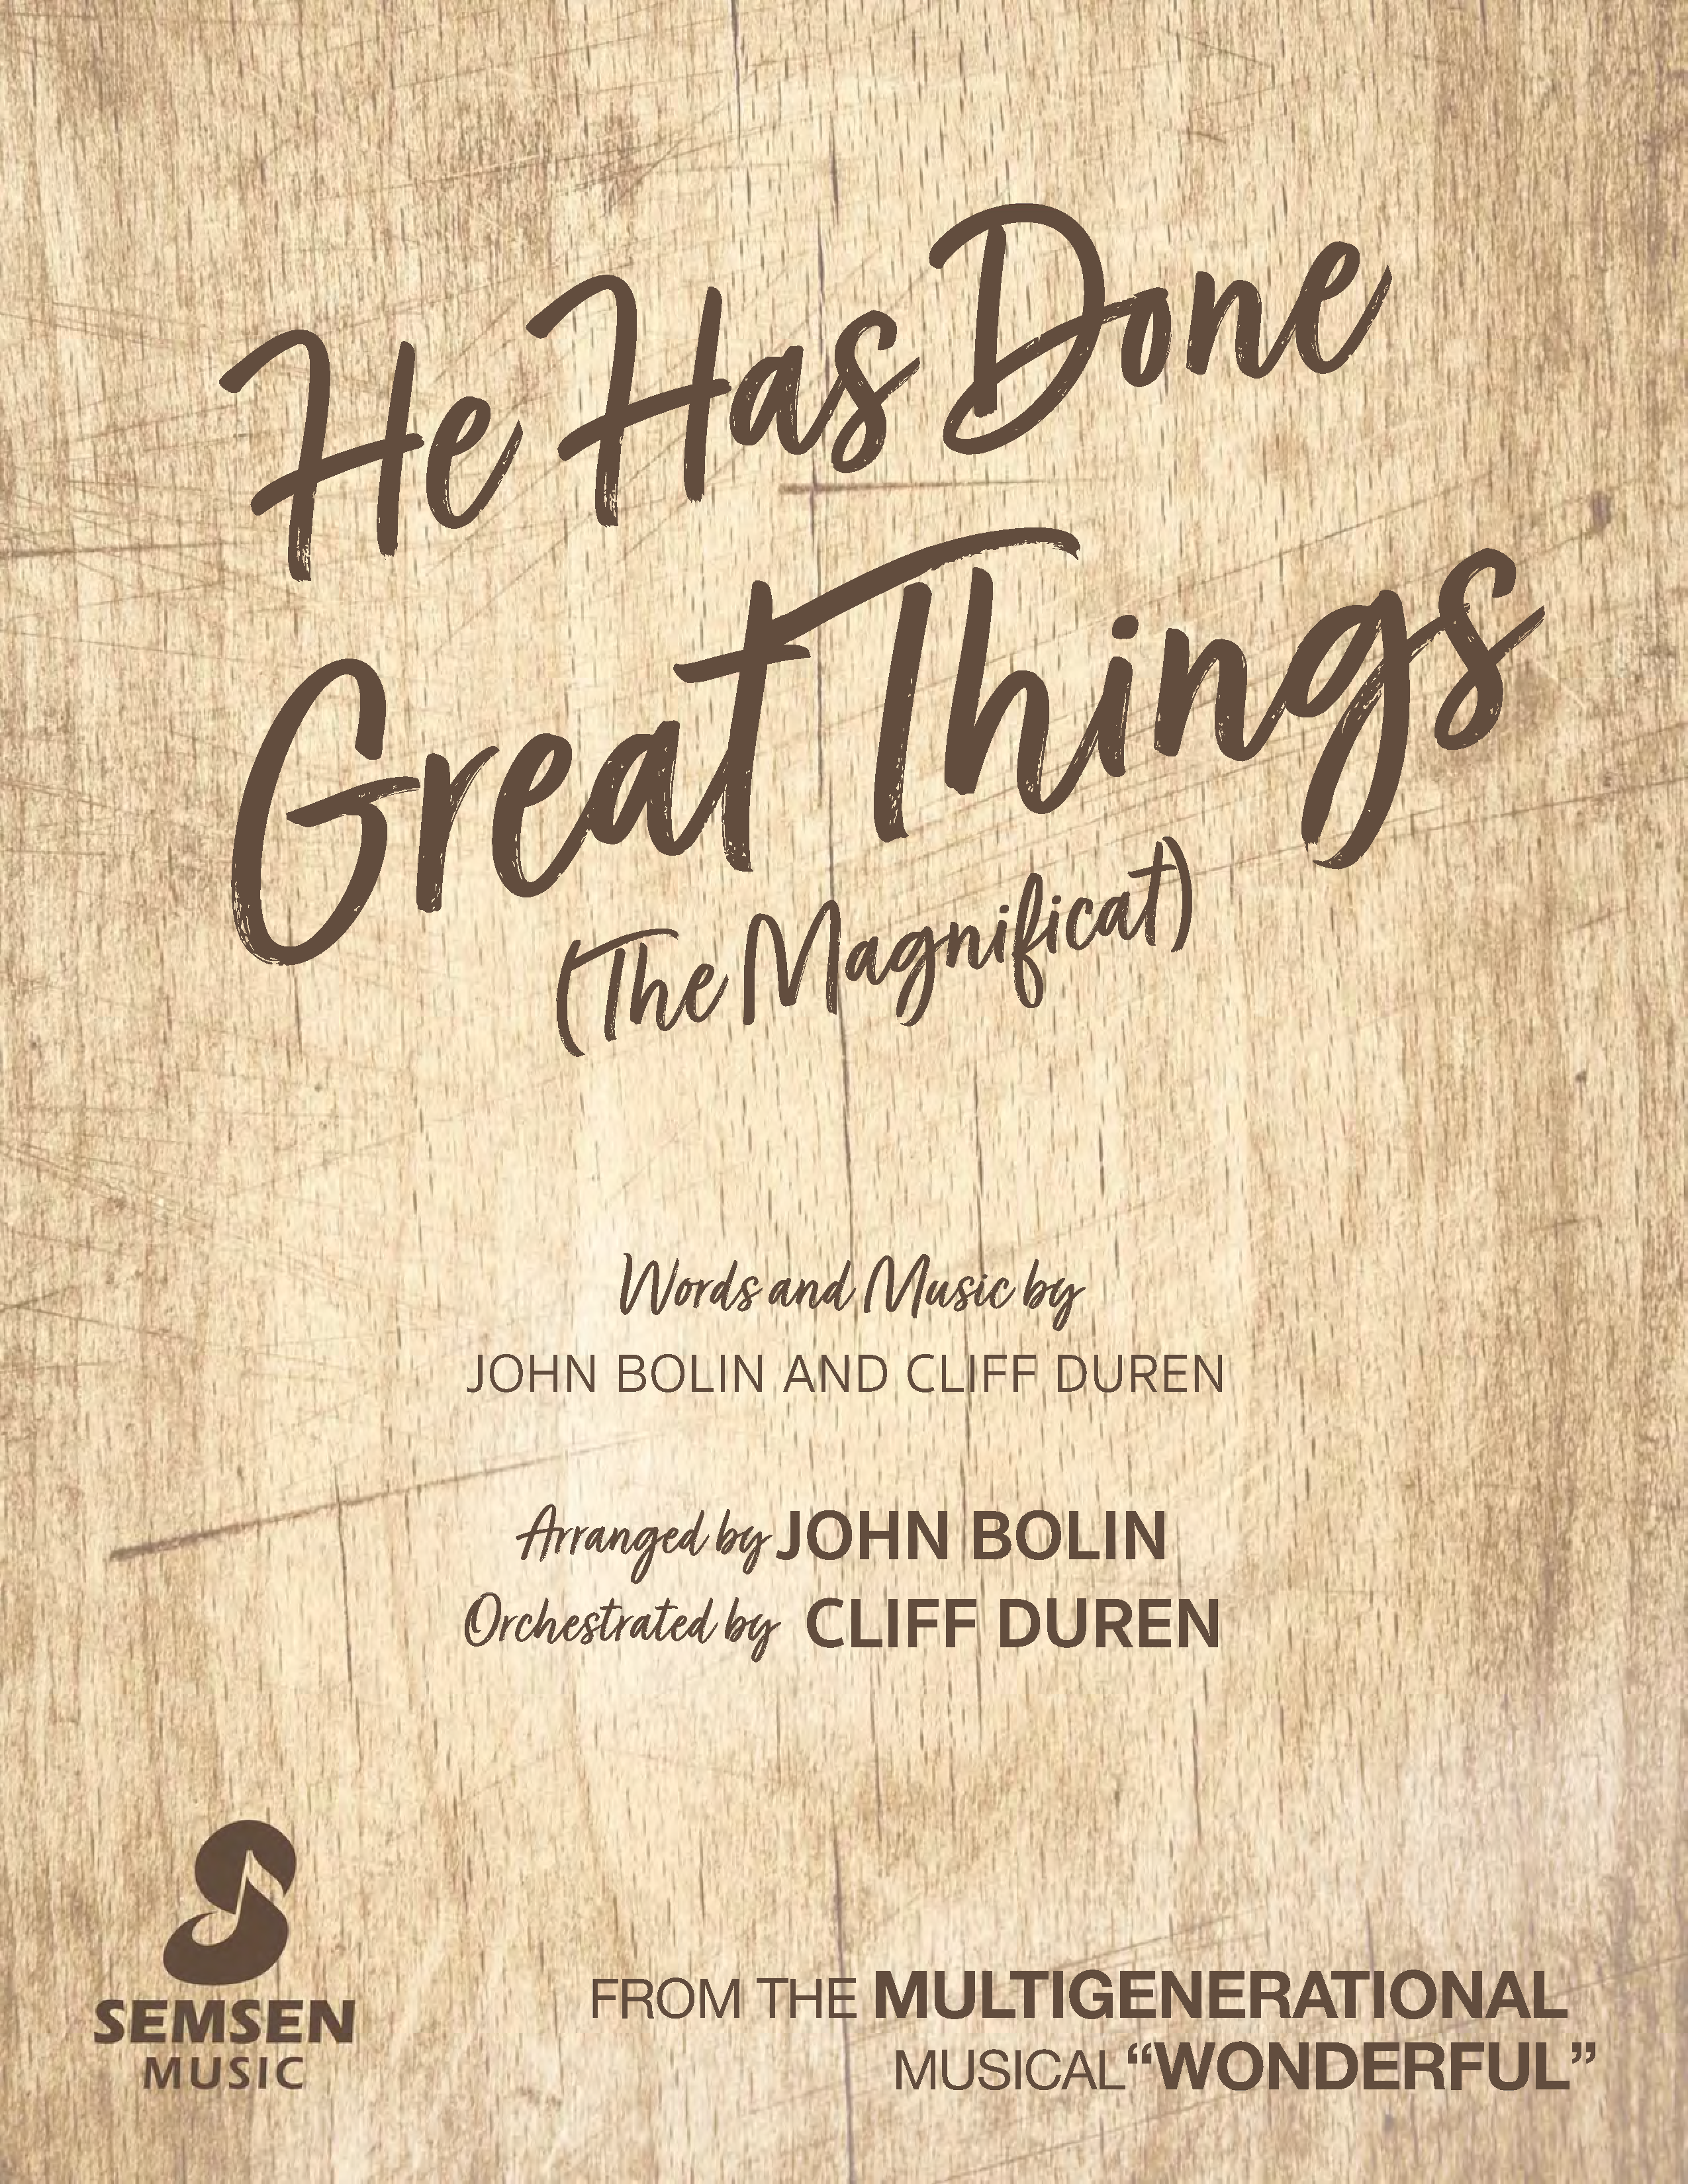 He Has Done Great Things (The Magnificat) (Choral Anthem SATB) Anthem (SATB/Piano) (Semsen Music / Arr. John Bolin / Orch. Cliff Duren)